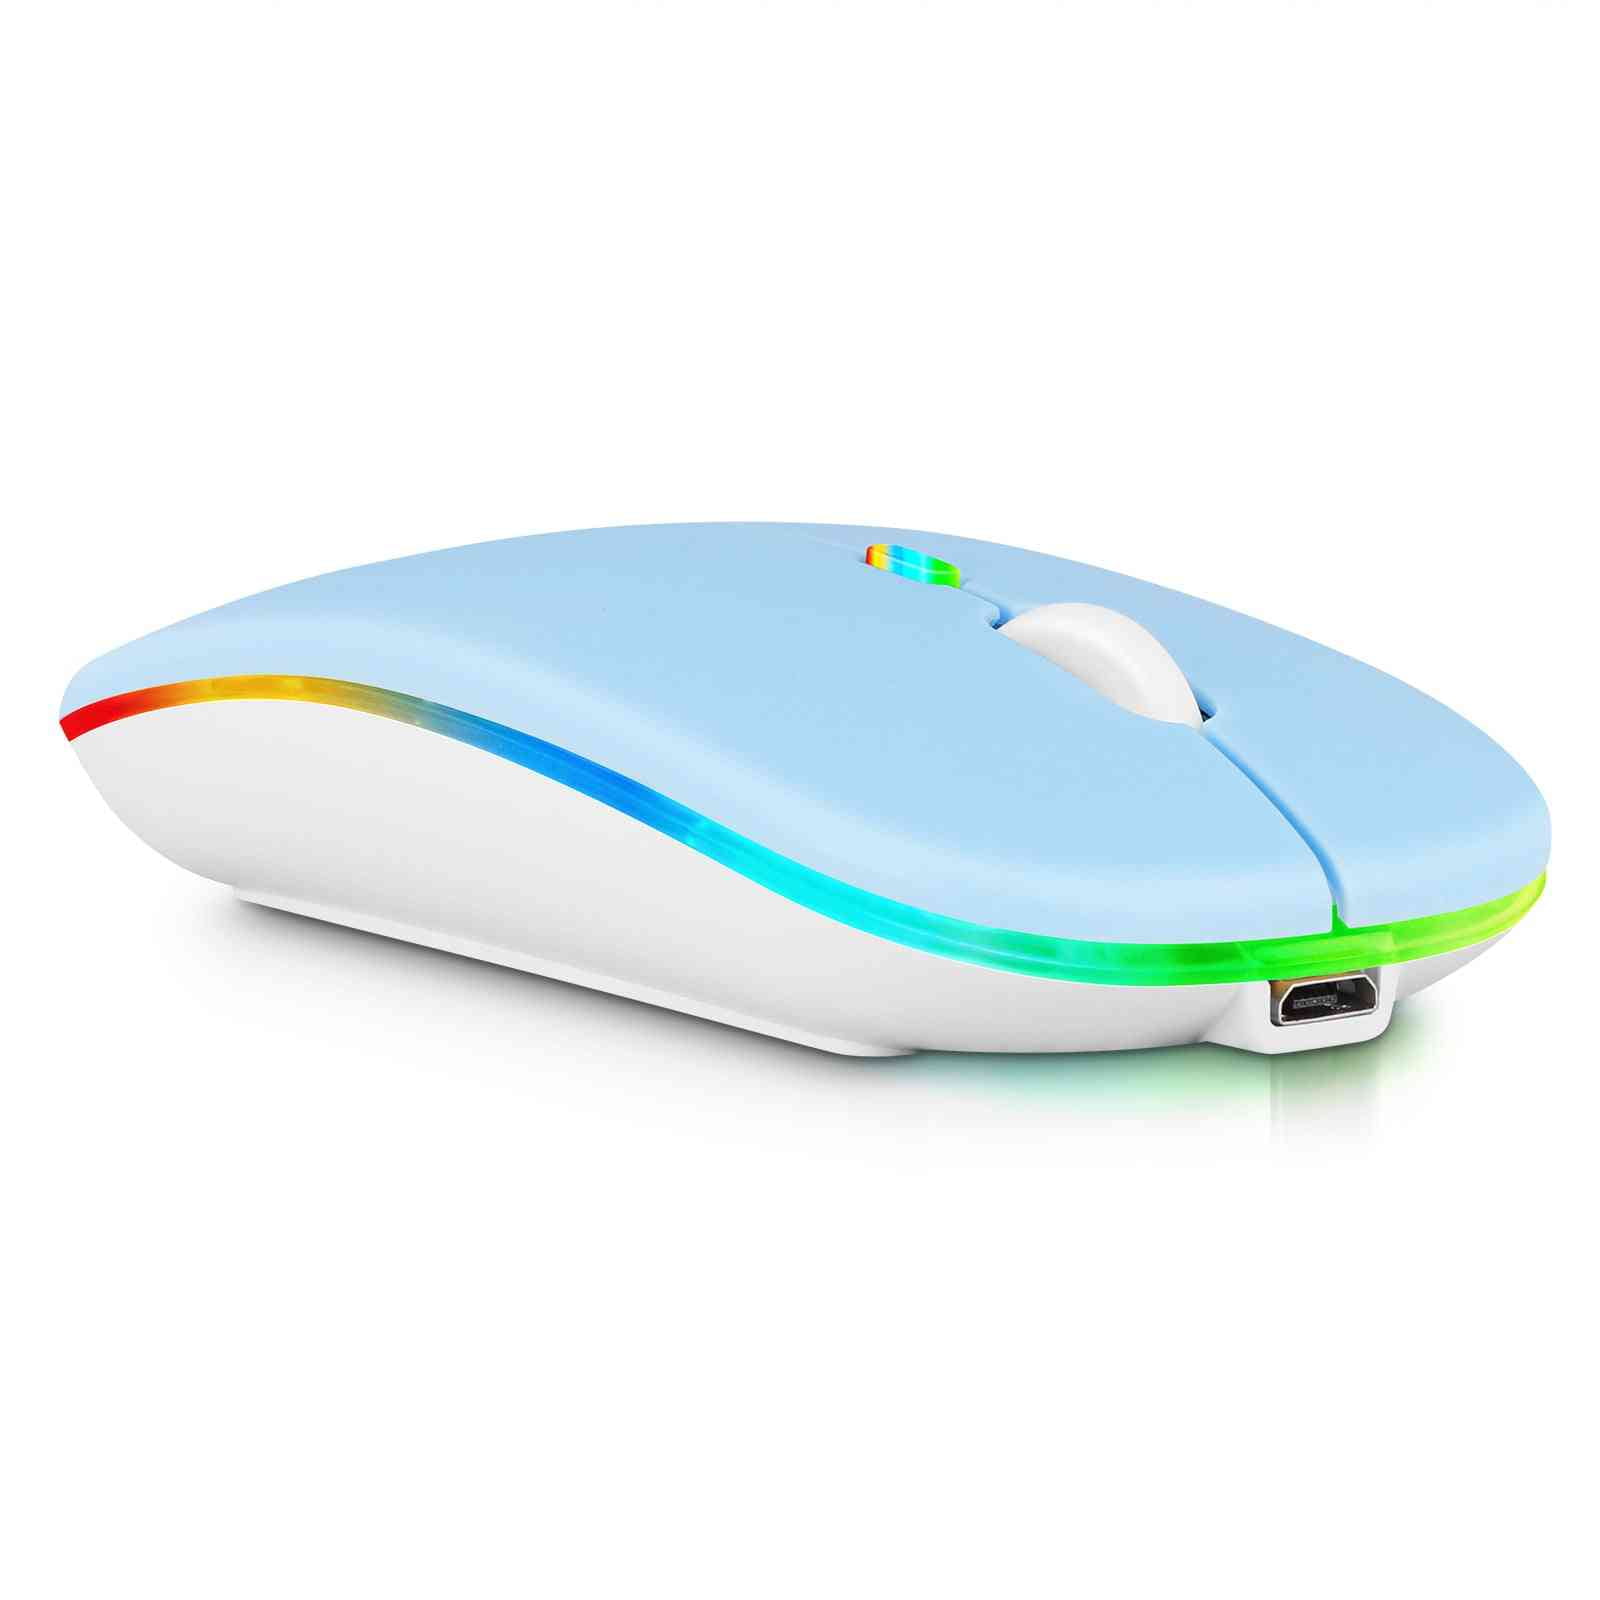 Bluetooth Rechargeable Mouse for Lenovo IdeaPad 3 Gaming Laptop Bluetooth Mouse Designed for Laptop / PC / Mac / iPad pro Computer Tablet / Android RGB LED Teal - Walmart.com